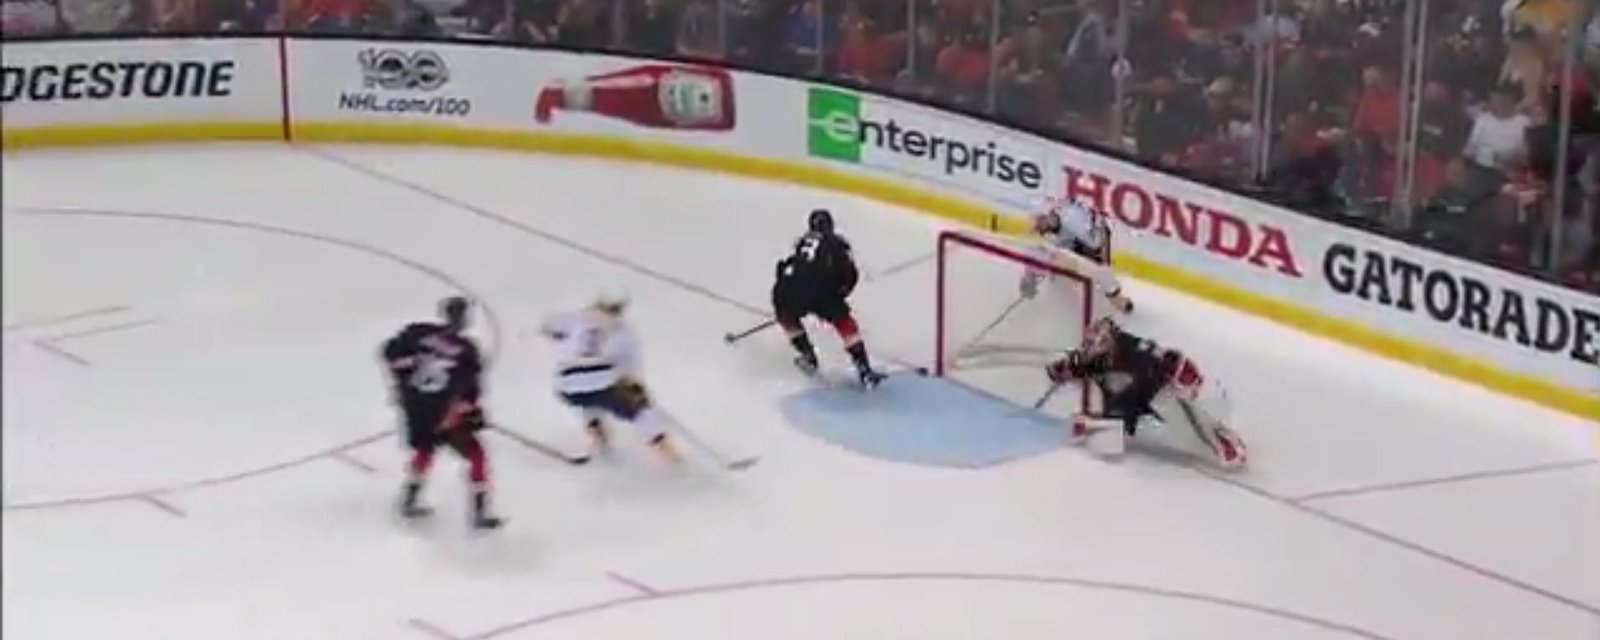 MUST SEE : Legendary fake shot leads to goal. 